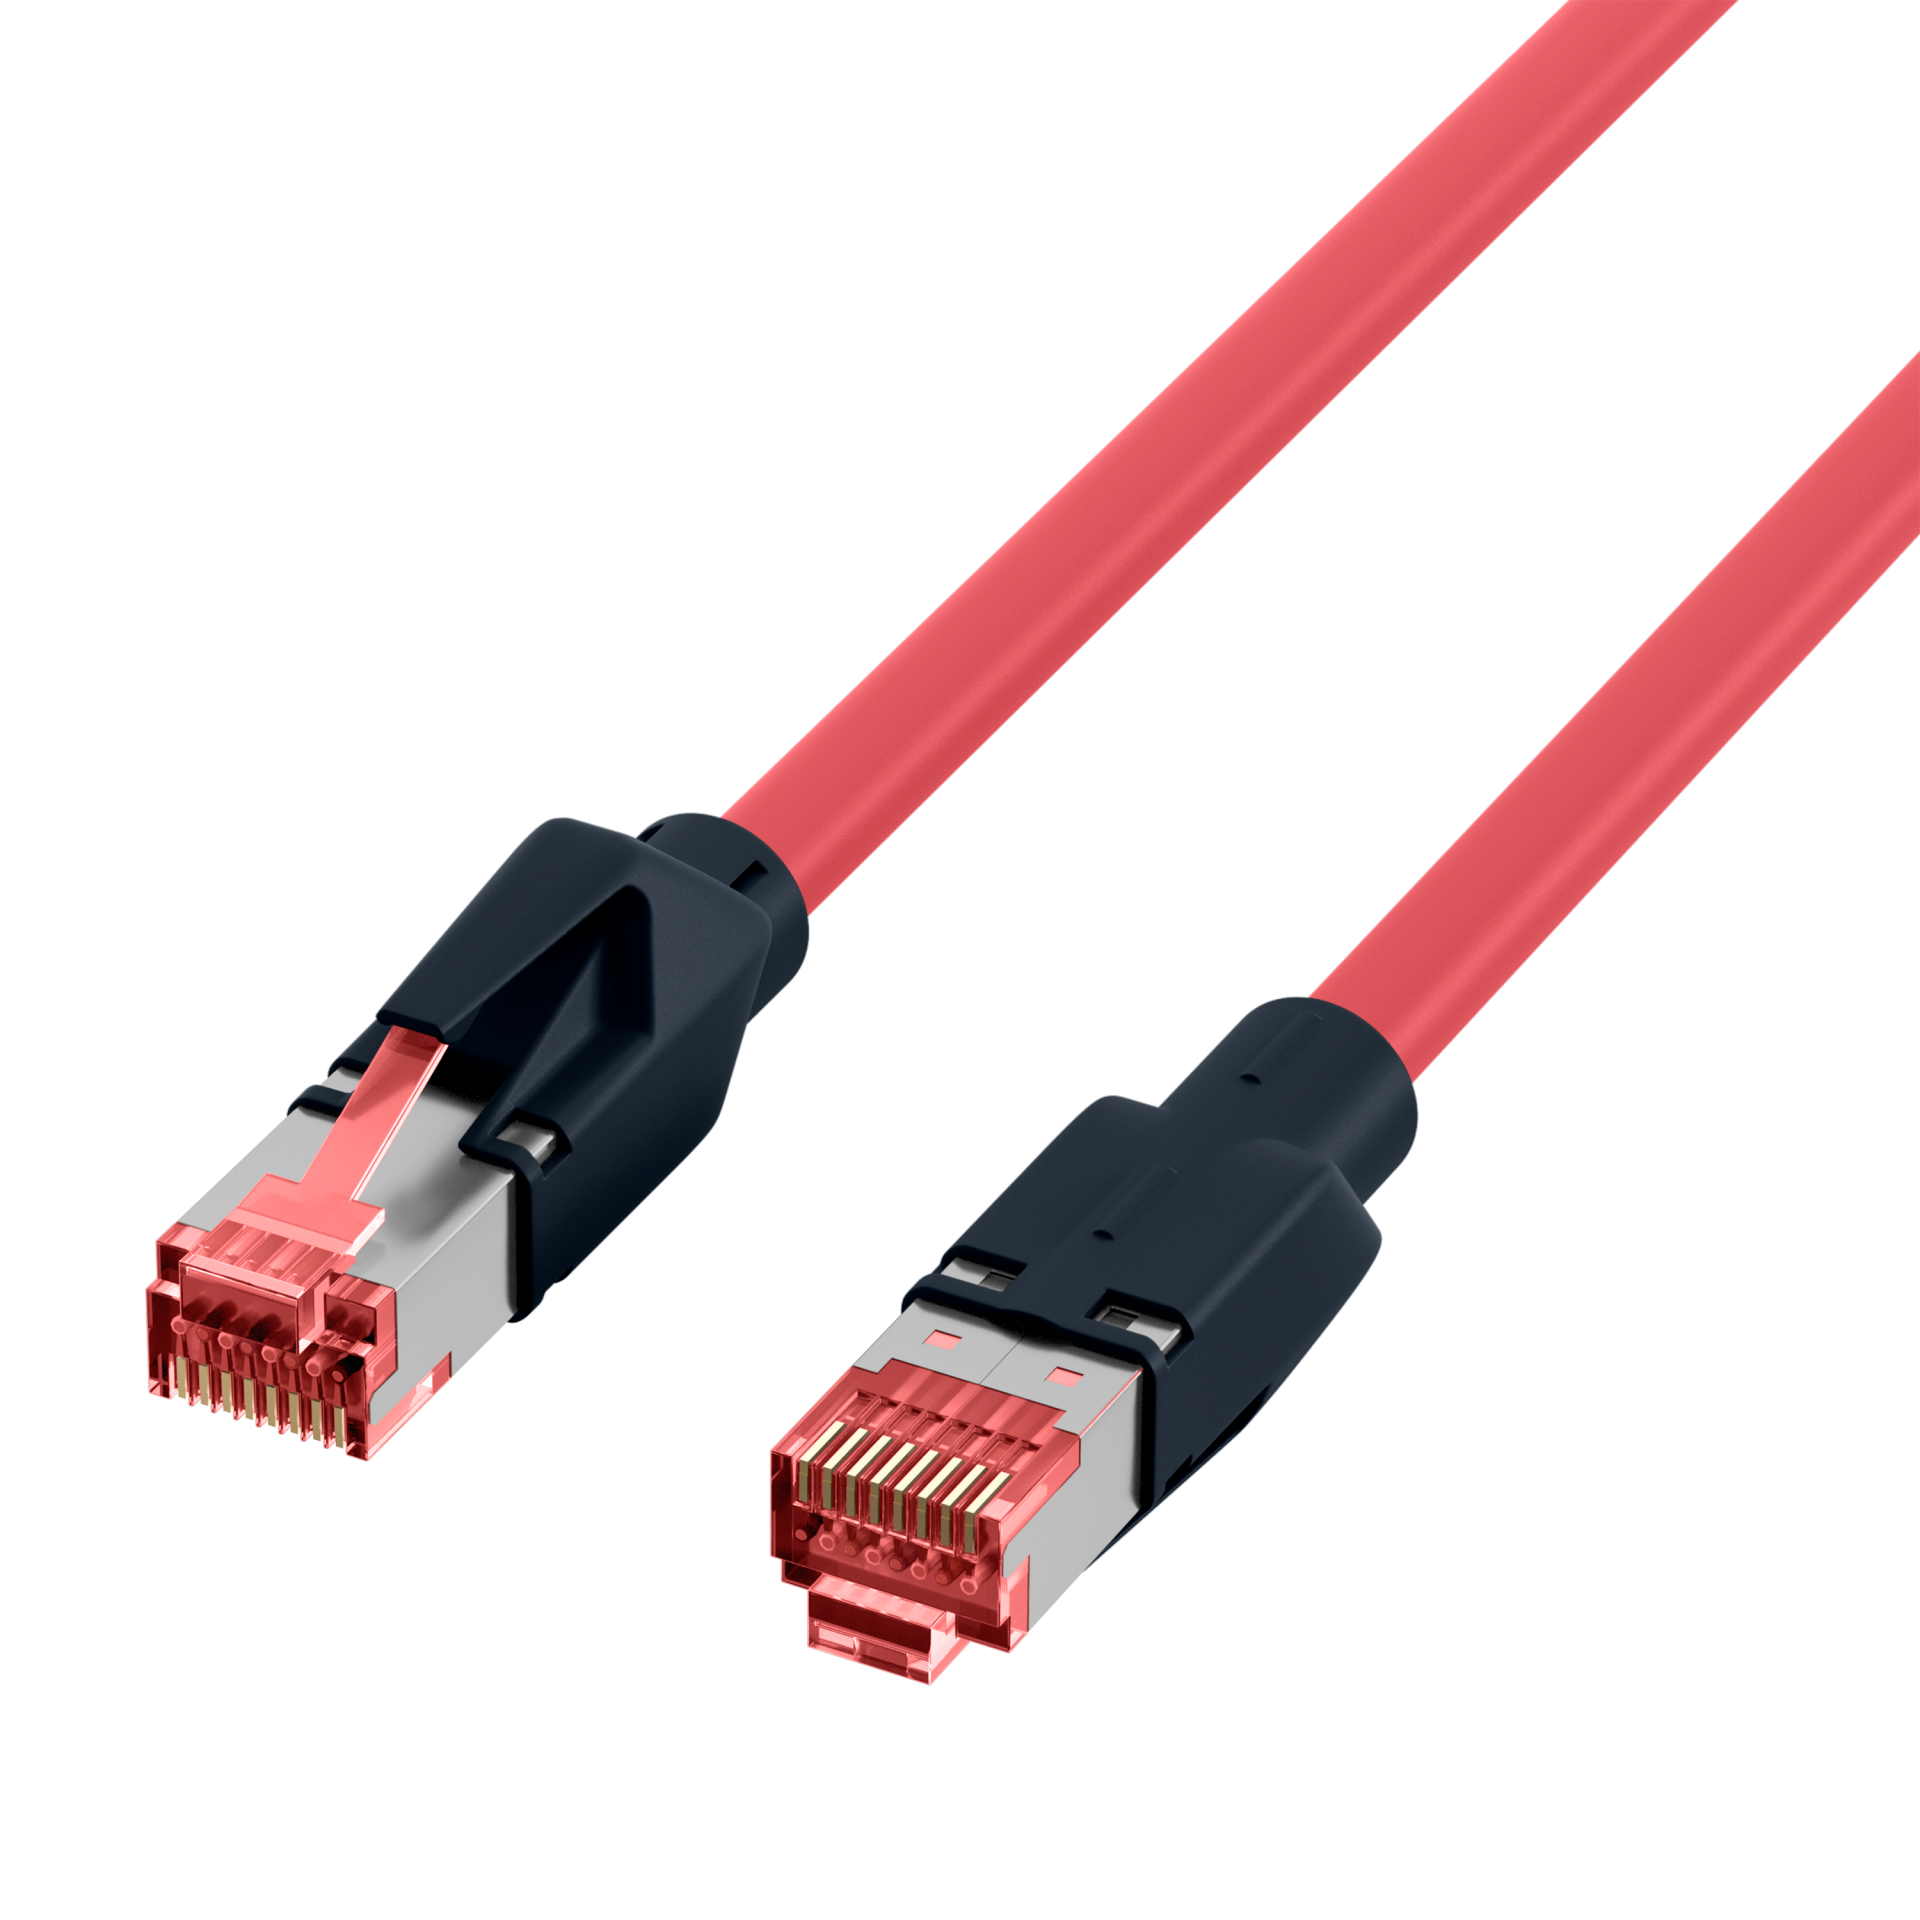 RJ45 Patch Cord Cat.6A S/FTP PUR Draka UC900 TM21 red 2m